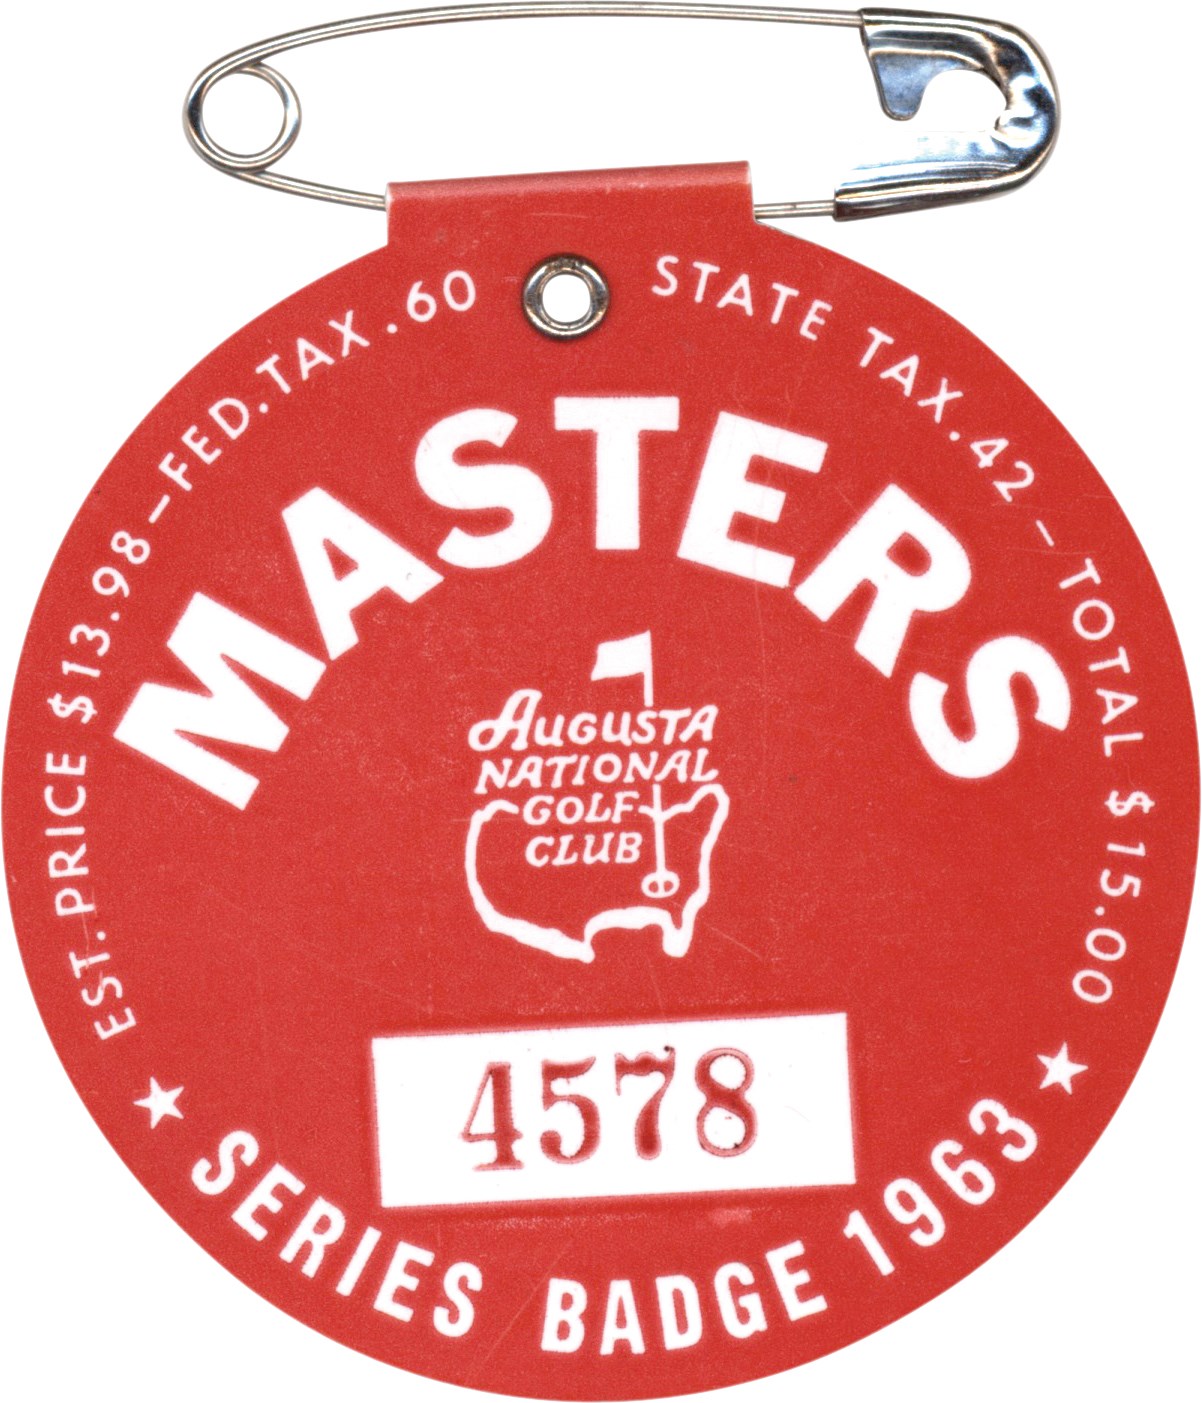 - 1963 Masters Badge - Jack Nicklaus First Masters Win